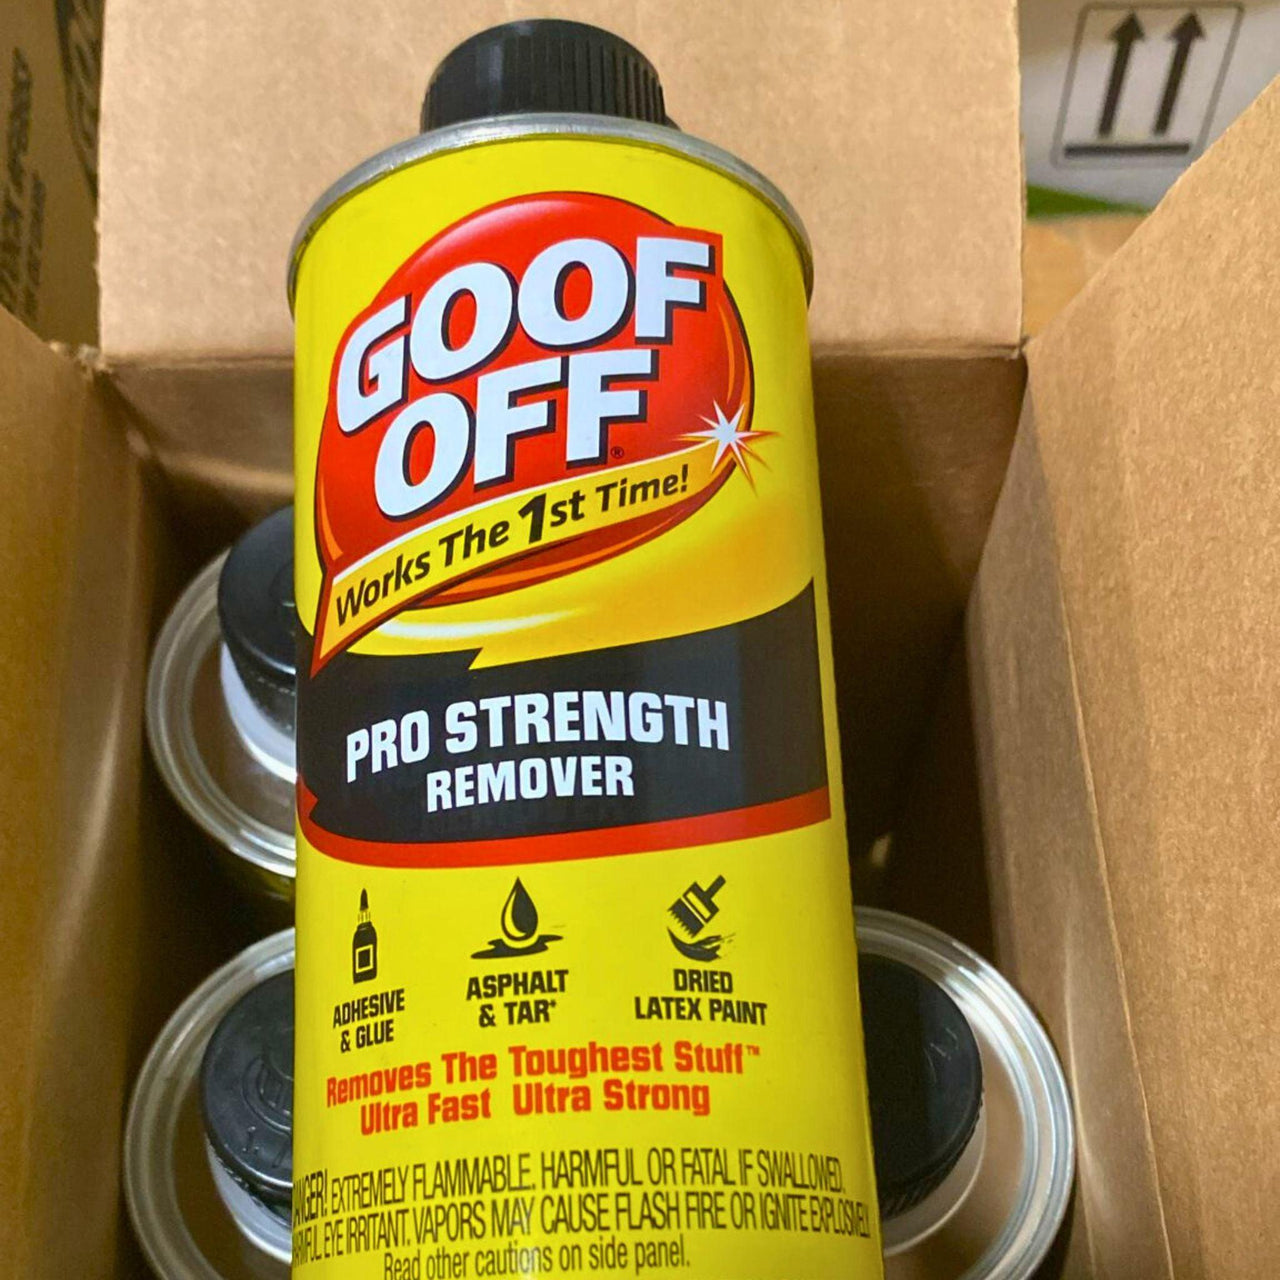 Goof Off Works The 1st Time! Pro Strength Removes the toughest stuff 16OZ (48 Pcs Lot) - Discount Wholesalers Inc